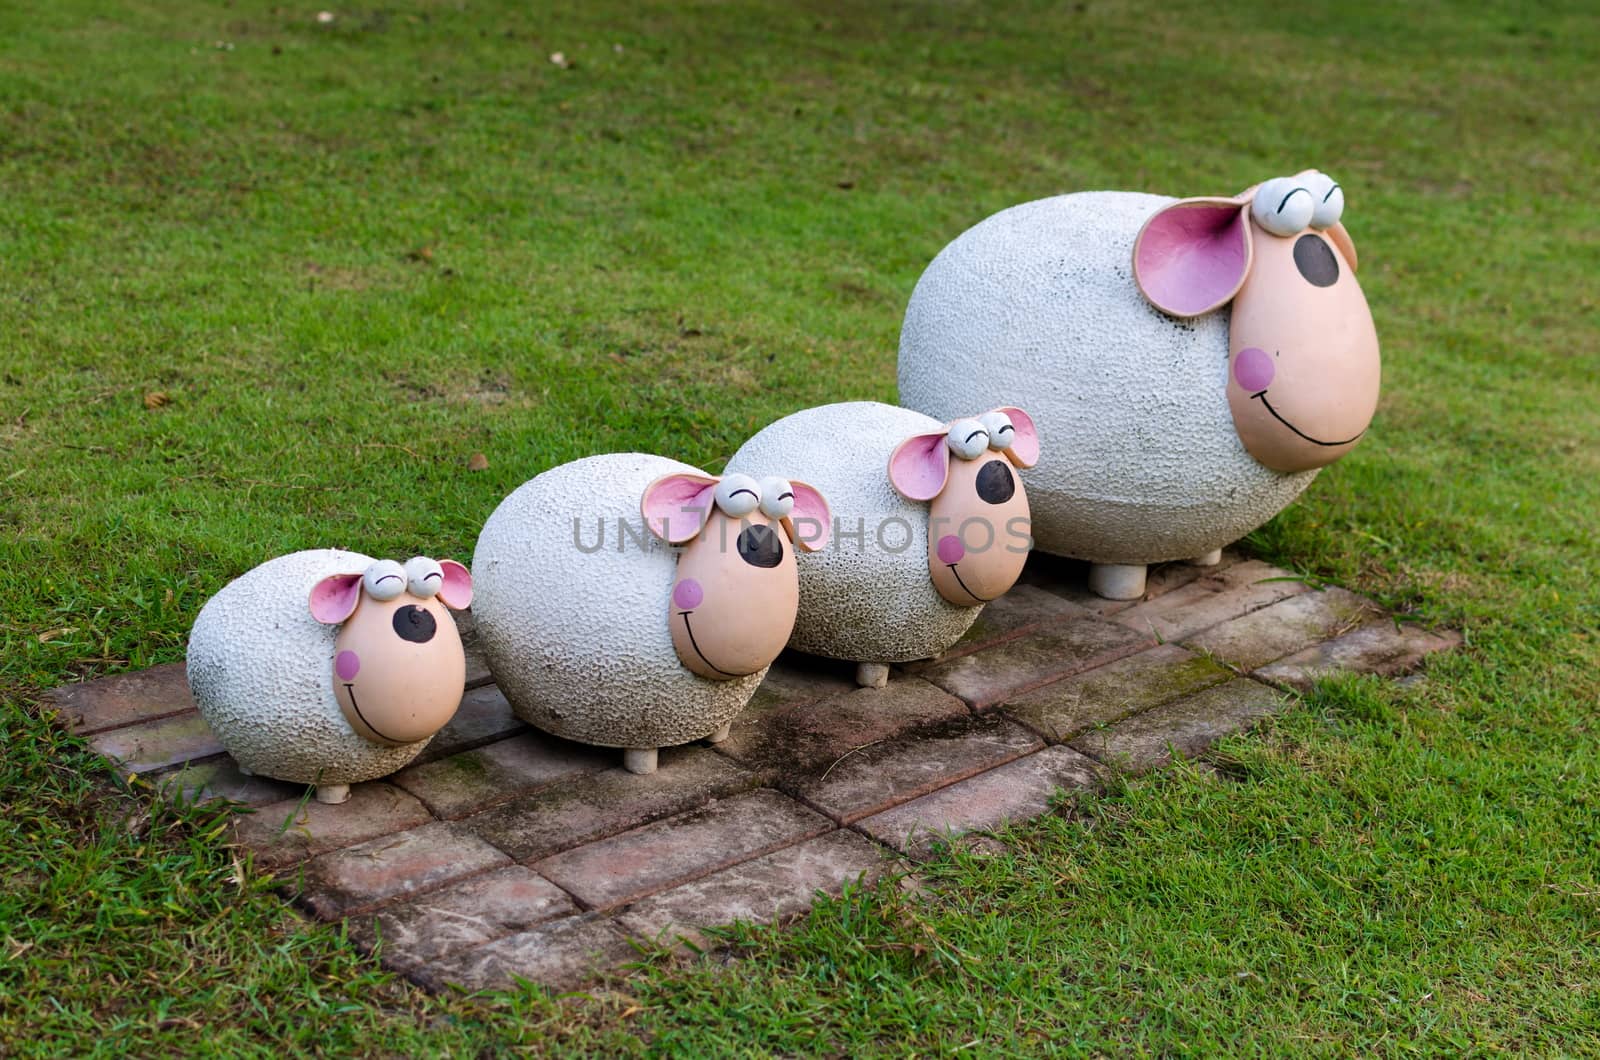 Smile white sheep statue by nop16